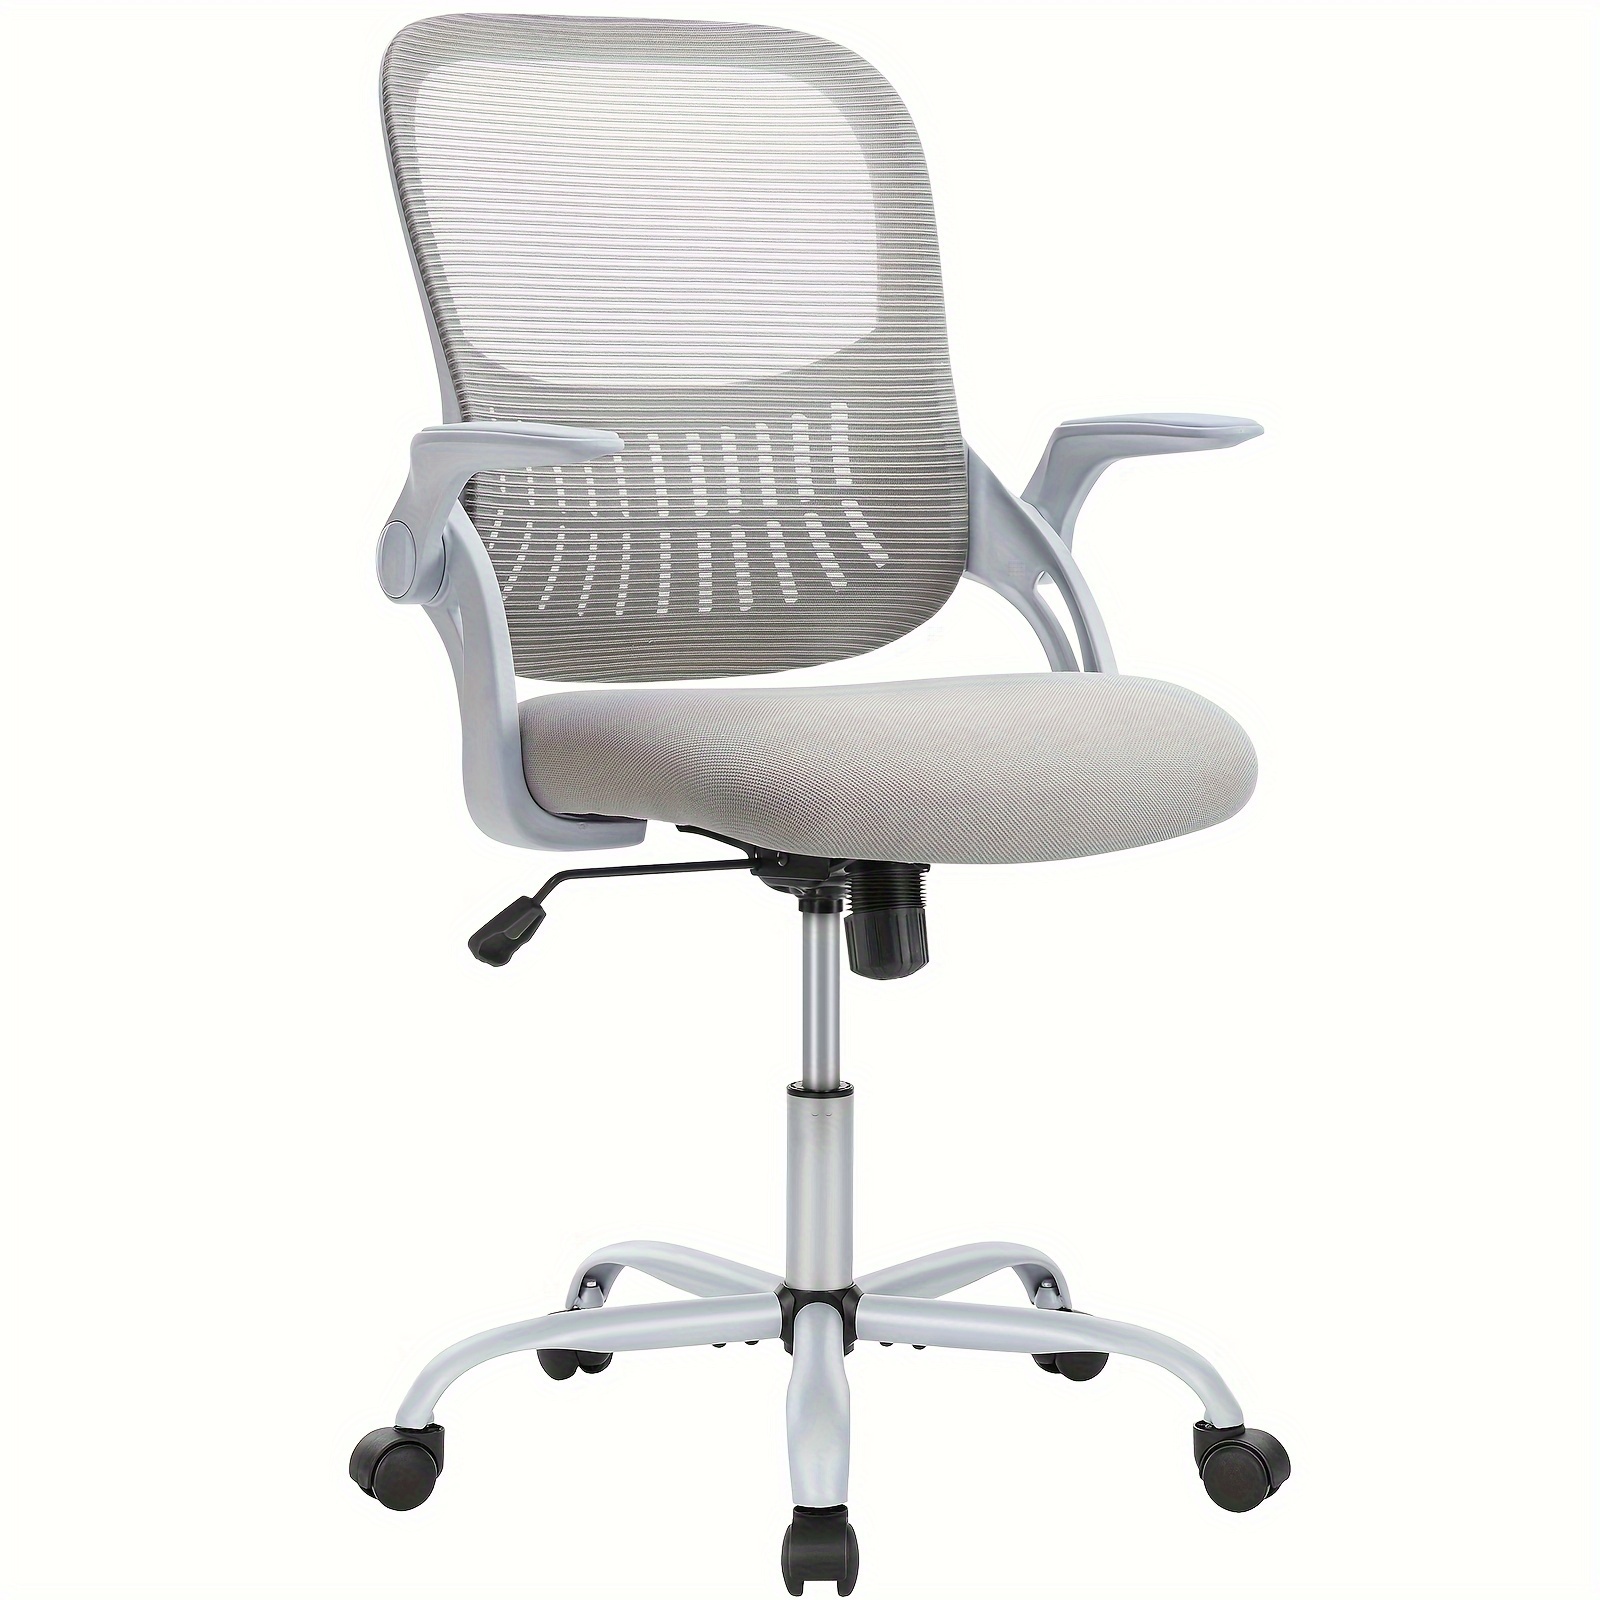 

Olixis Office Computer Desk Chair, Ergonomic Mid-back Managerial Executive Mesh Rolling Work Swivel With Wheels, Comfortable Lumbar Support, Comfy Flip-up Arms For Home, Office